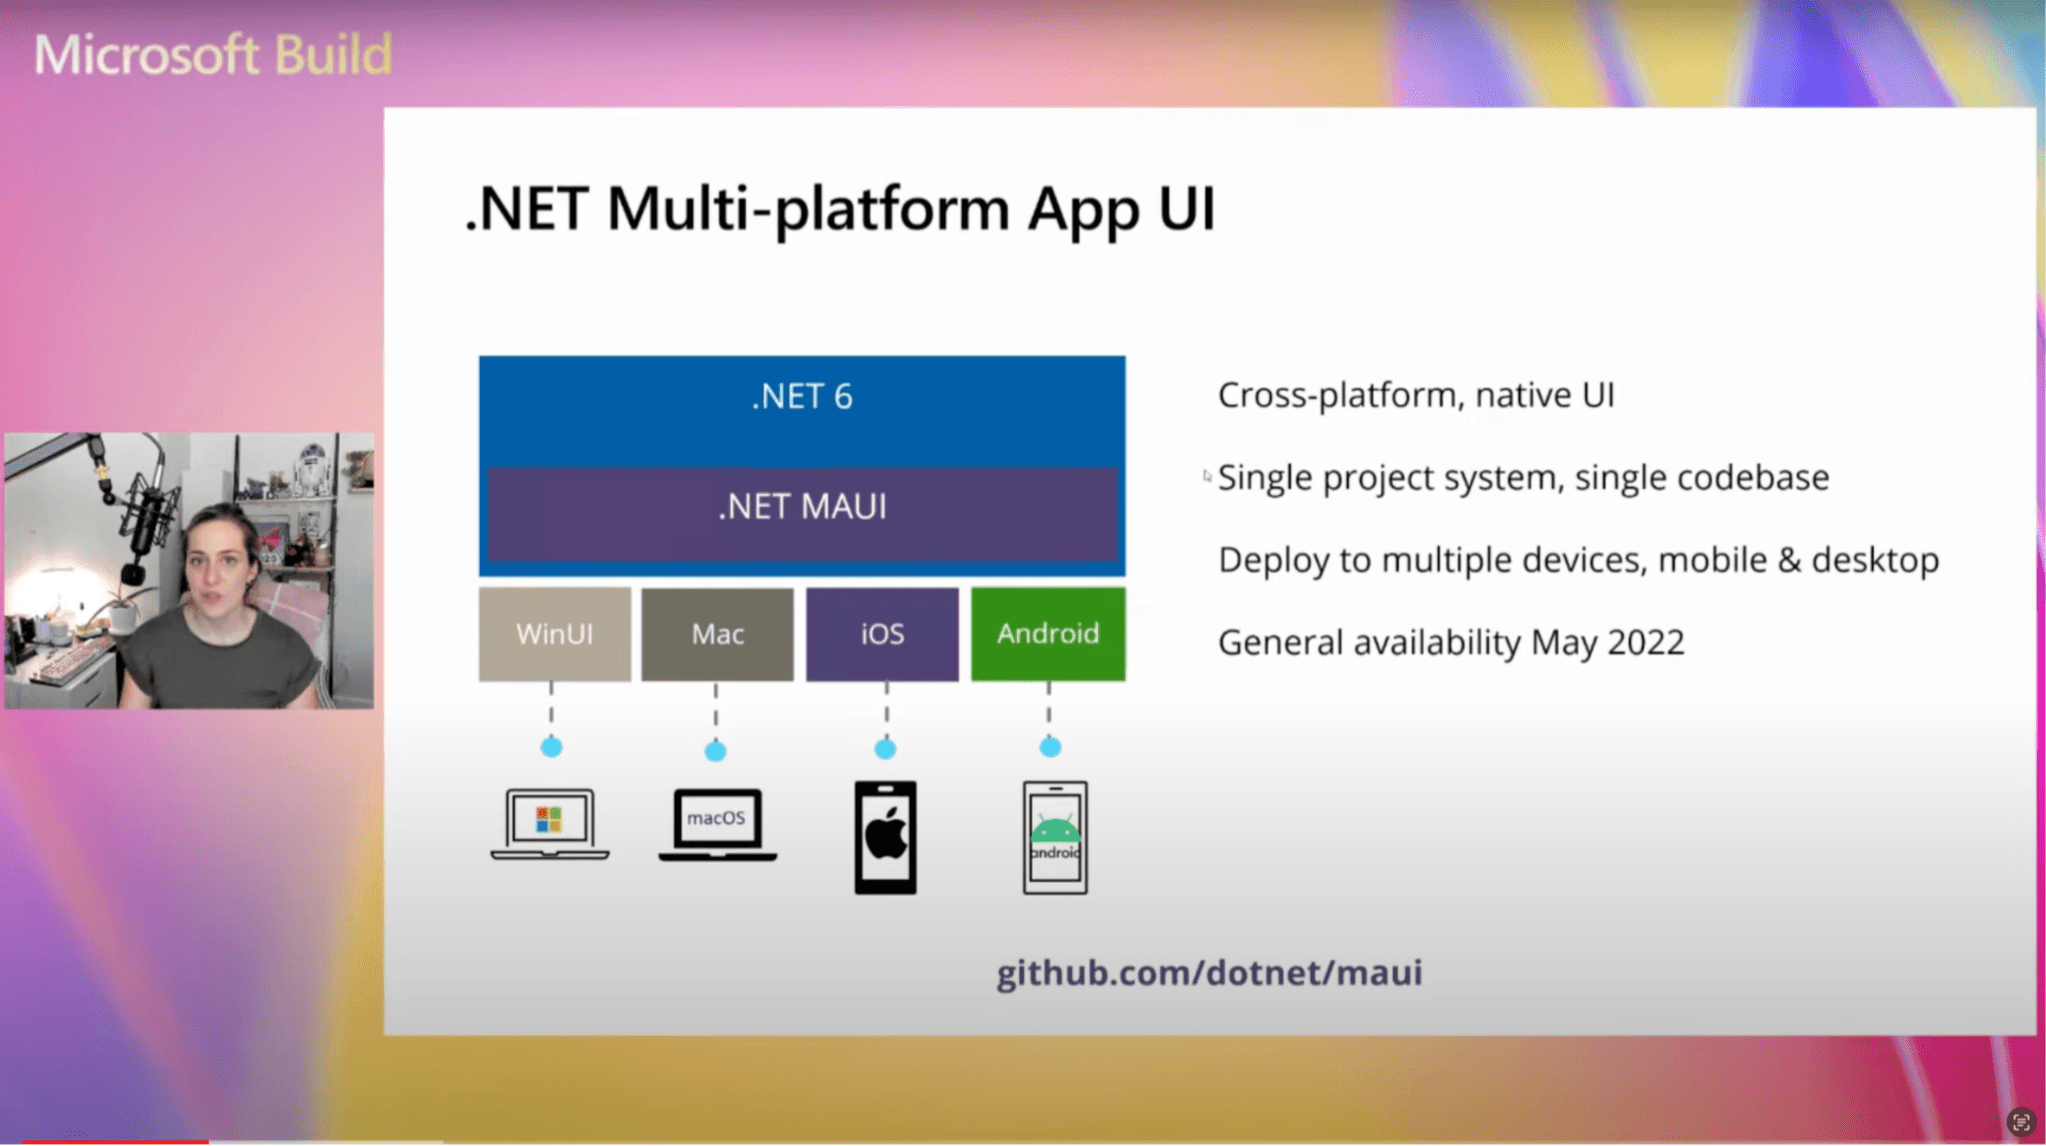 cross-platform, native UI; single project system; deploy to multiple devices, mobile & desktop; general availability May 2022